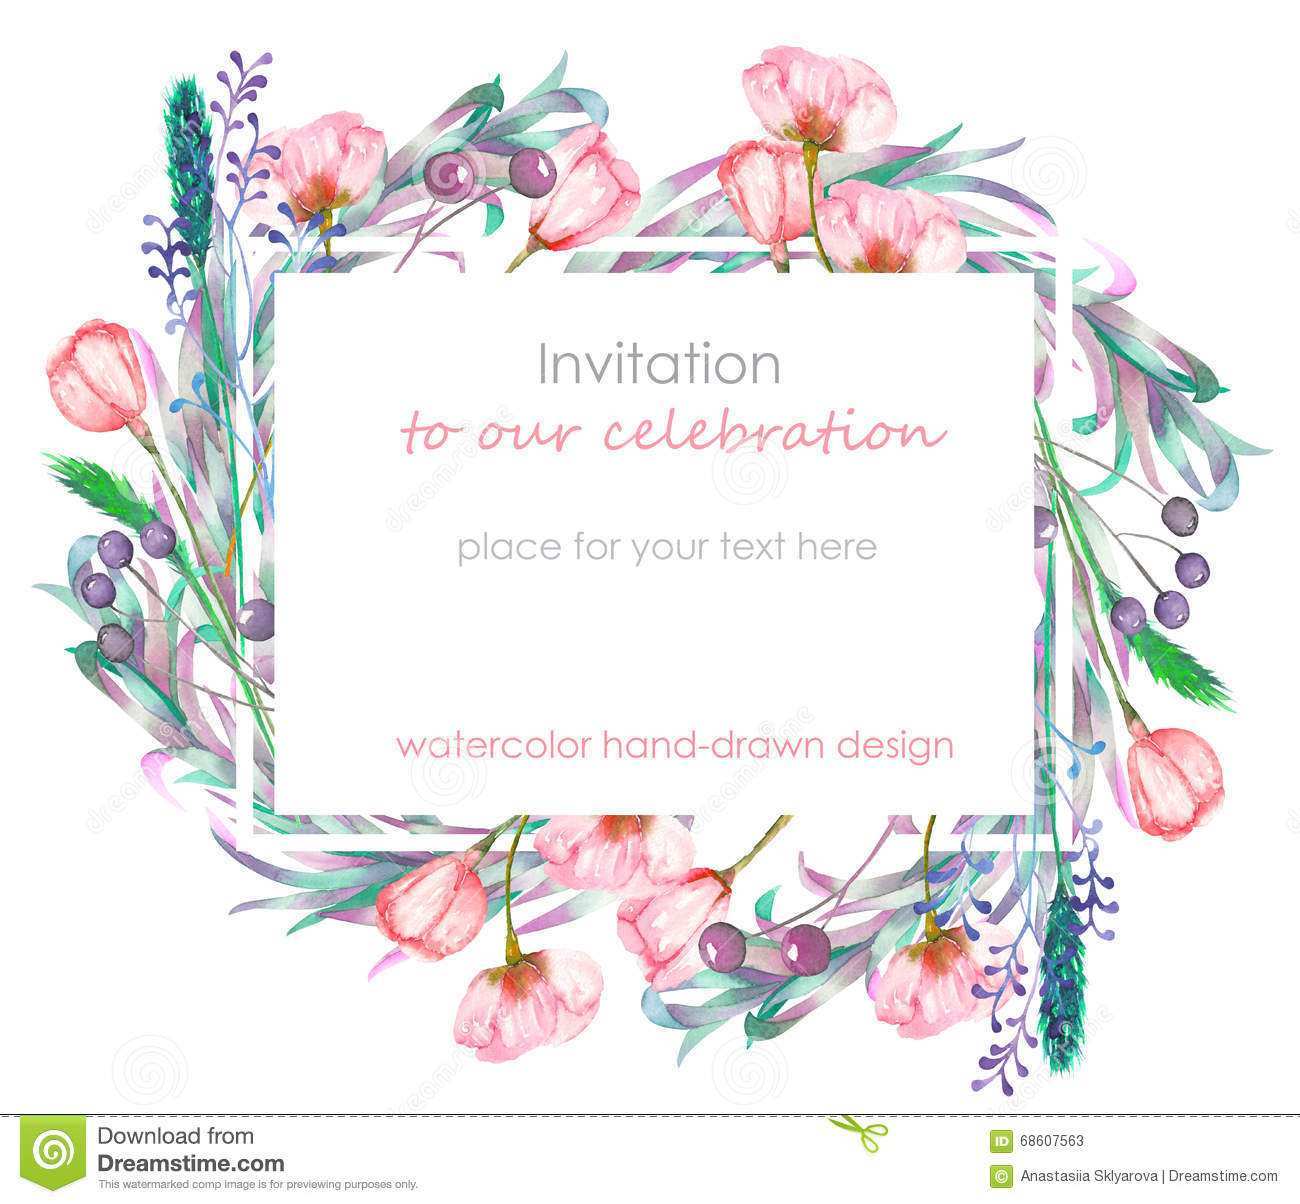 75 Visiting Spring Card Template Free in Word with Spring Card Template Free